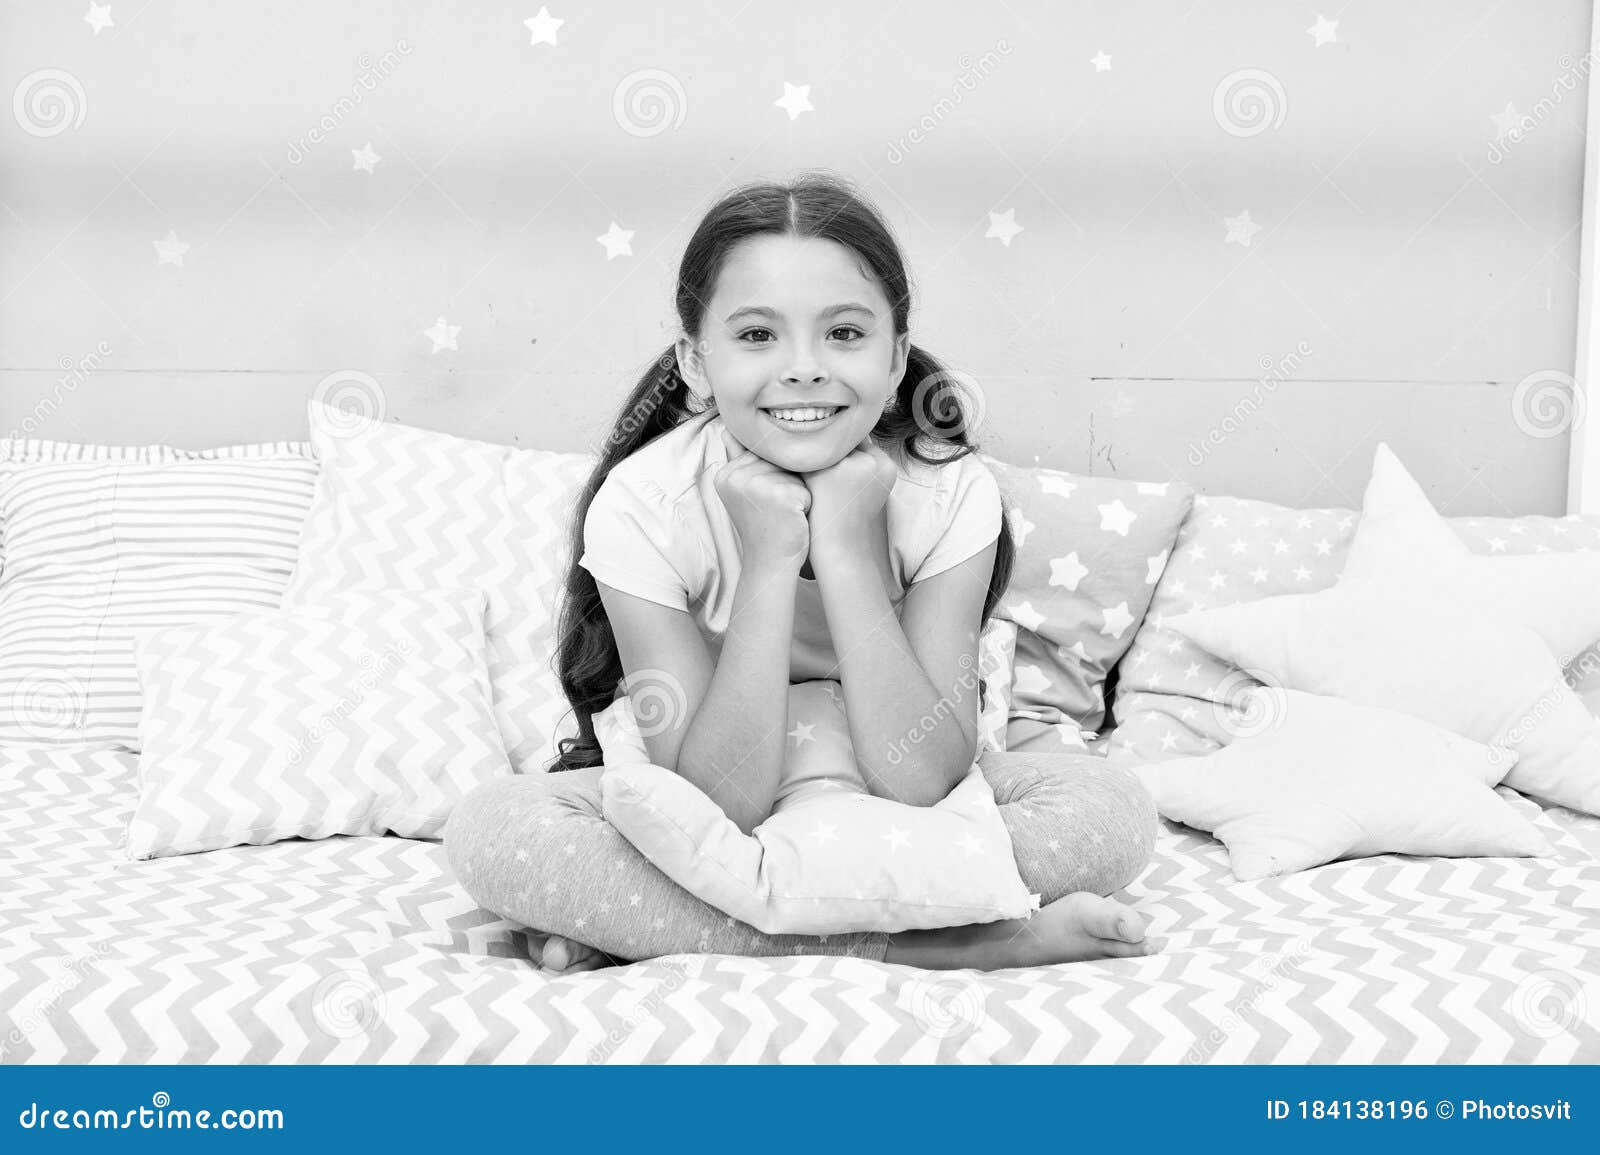 Calming Activity for Kids. Ways To Relax before Bedtime. Relaxation ...